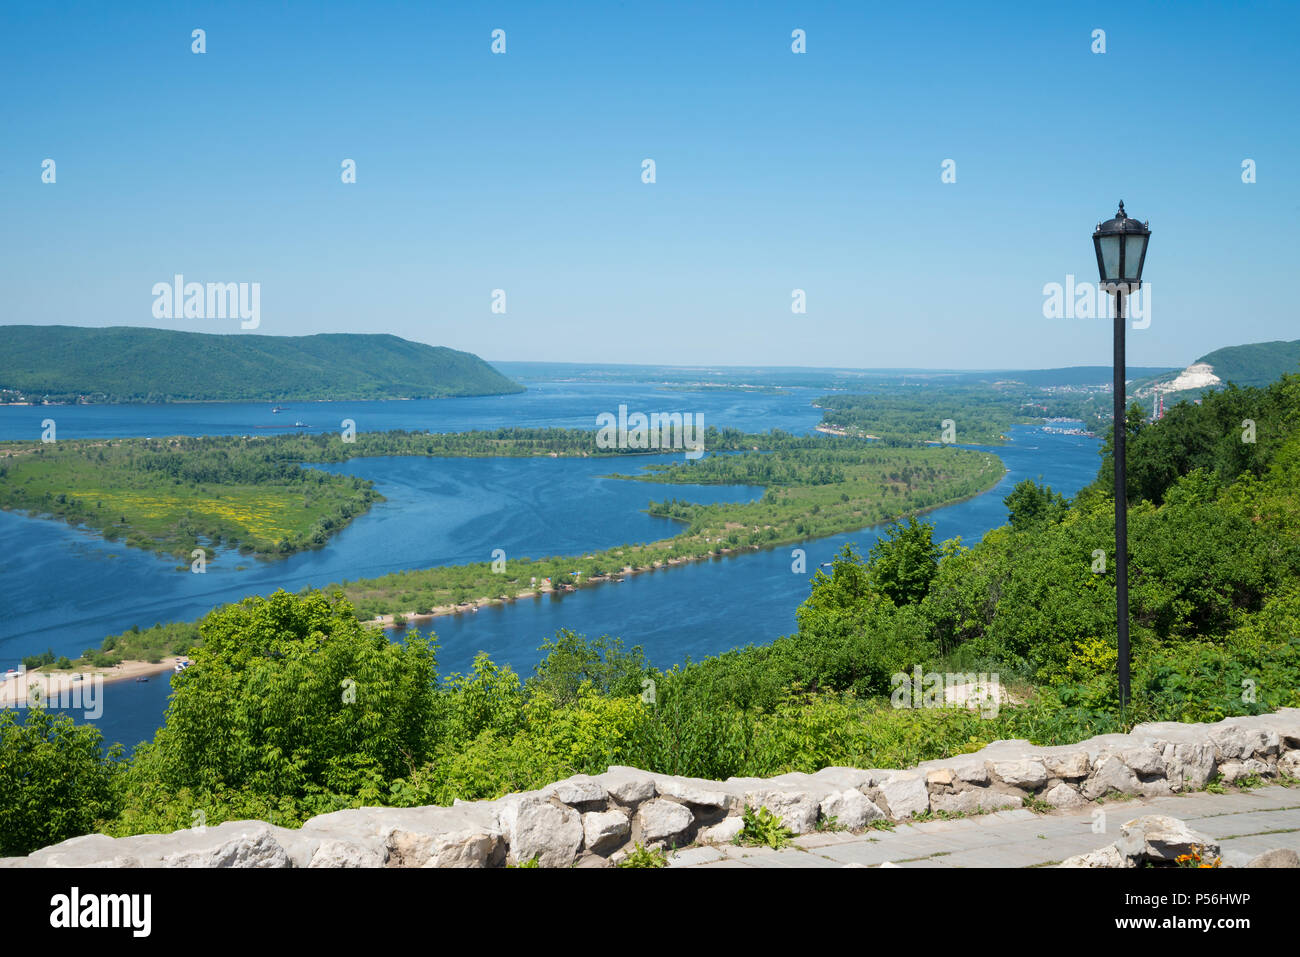 Panoramic view of the river Volga from a helicopter platform the city of Samara Russia. Stock Photo